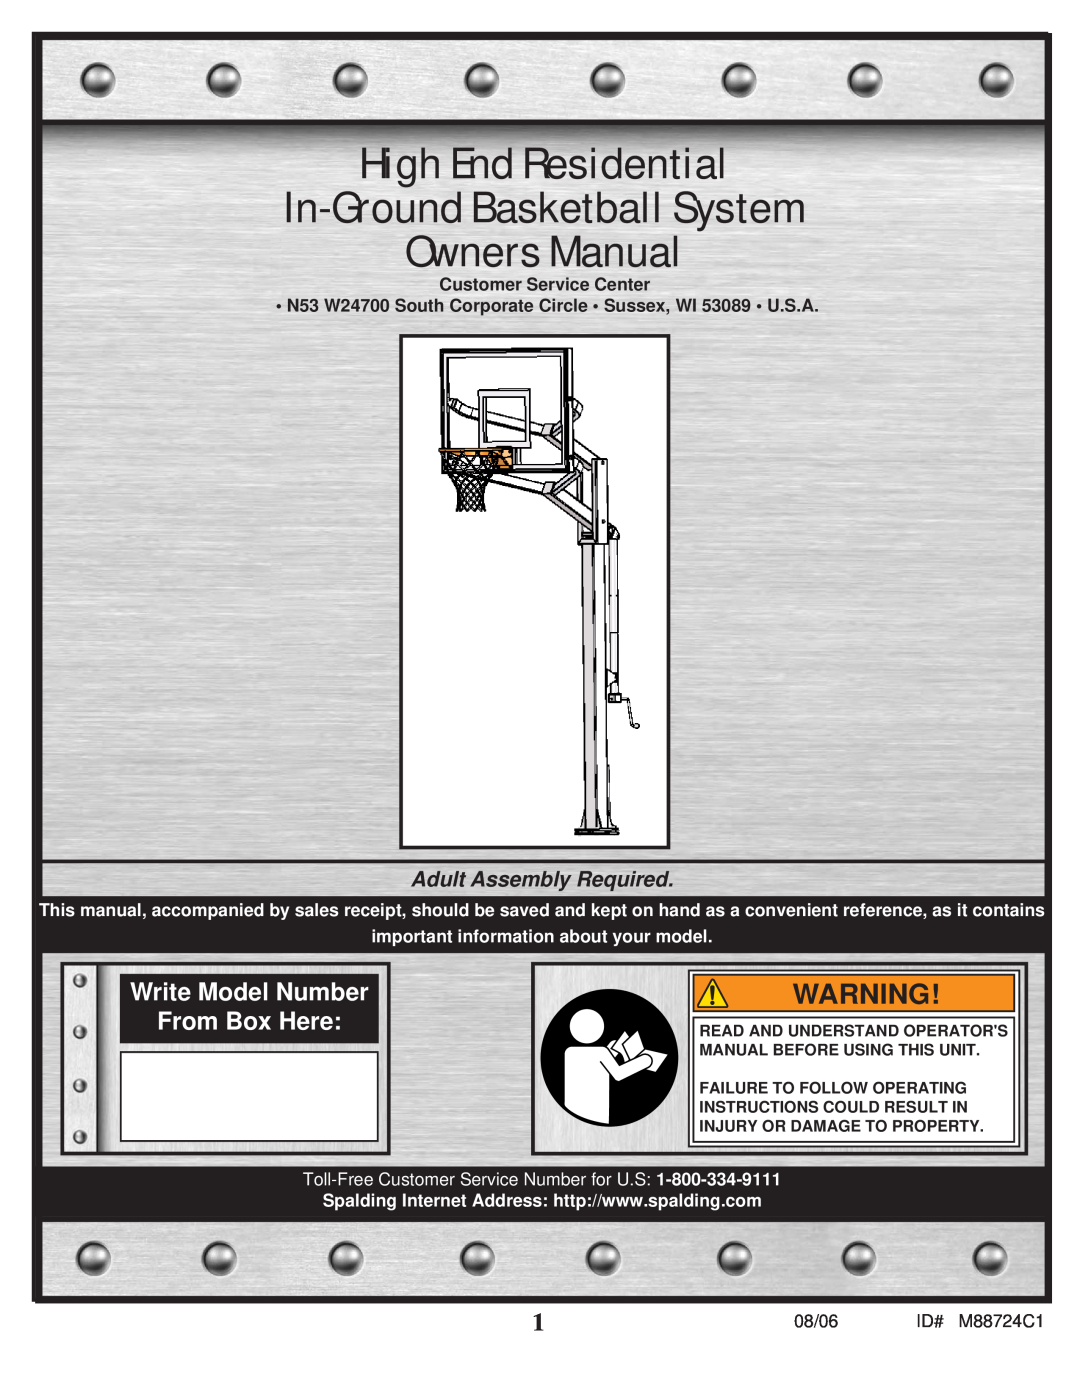 Spalding M88724C1 manual High End Residential In-Ground Basketball System Owners Manual, Write Model Number From Box Here 